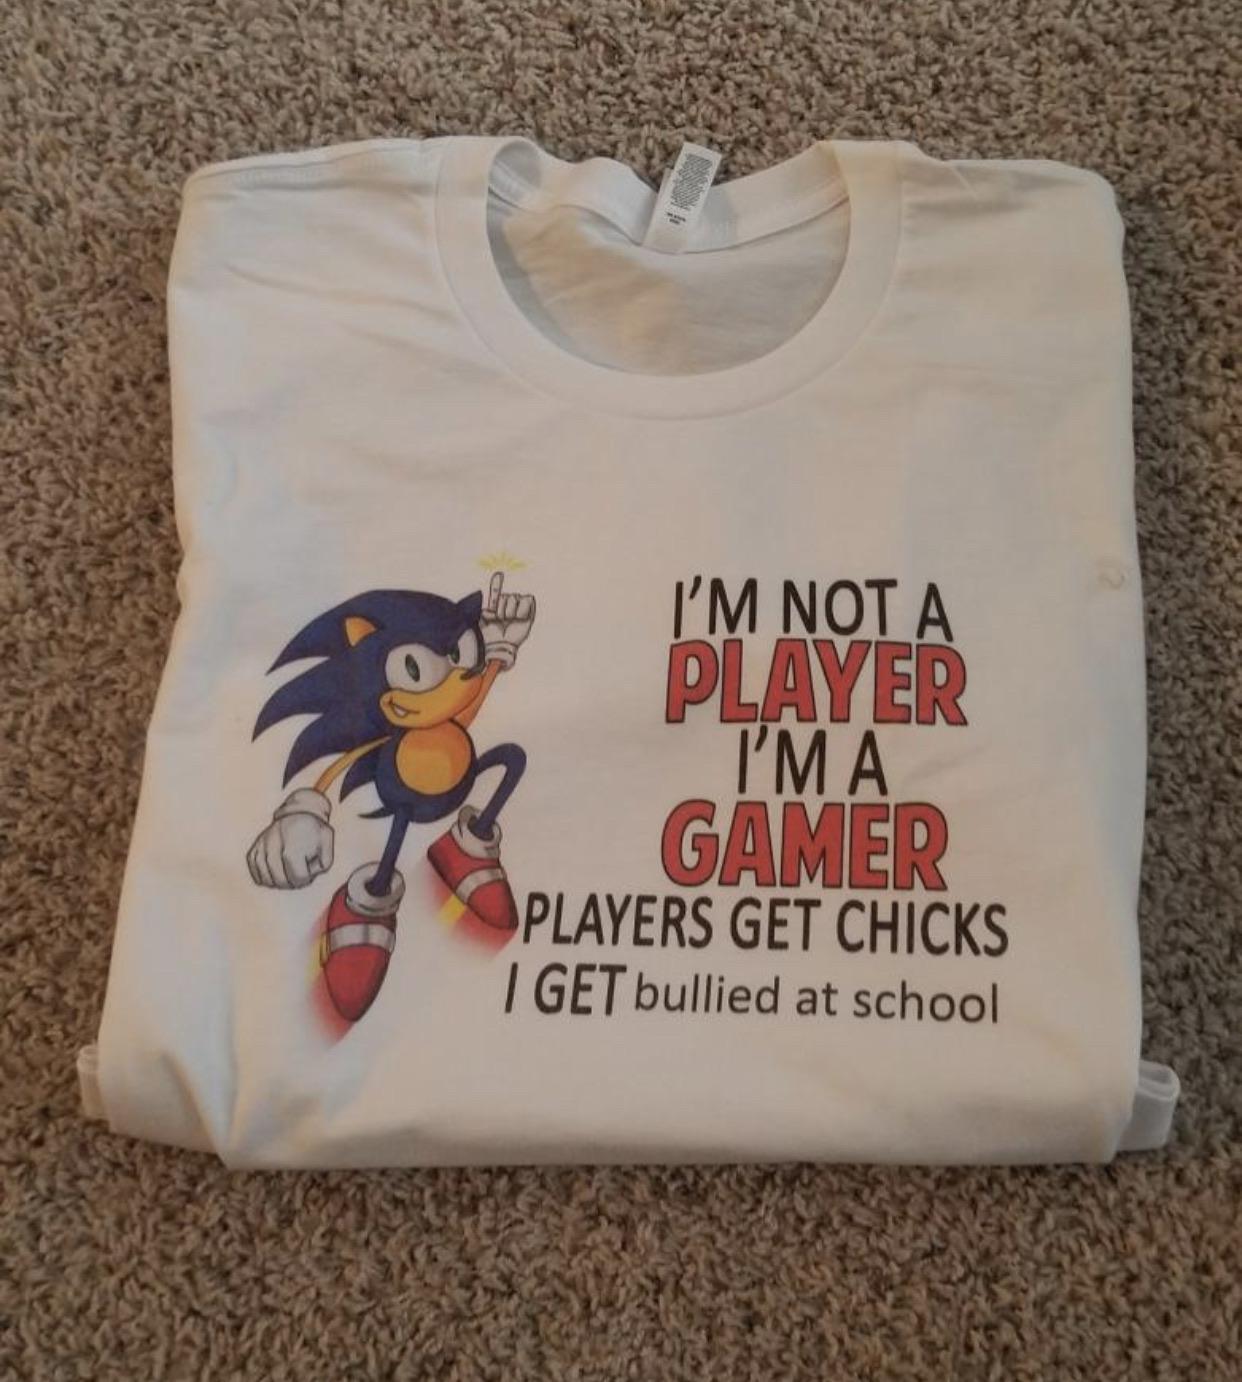 funny gaming memes - i m not a player i m a gamer shirt - fa I'M Not A Player I'M A Gamer Players Get Chicks I Get bullied at school